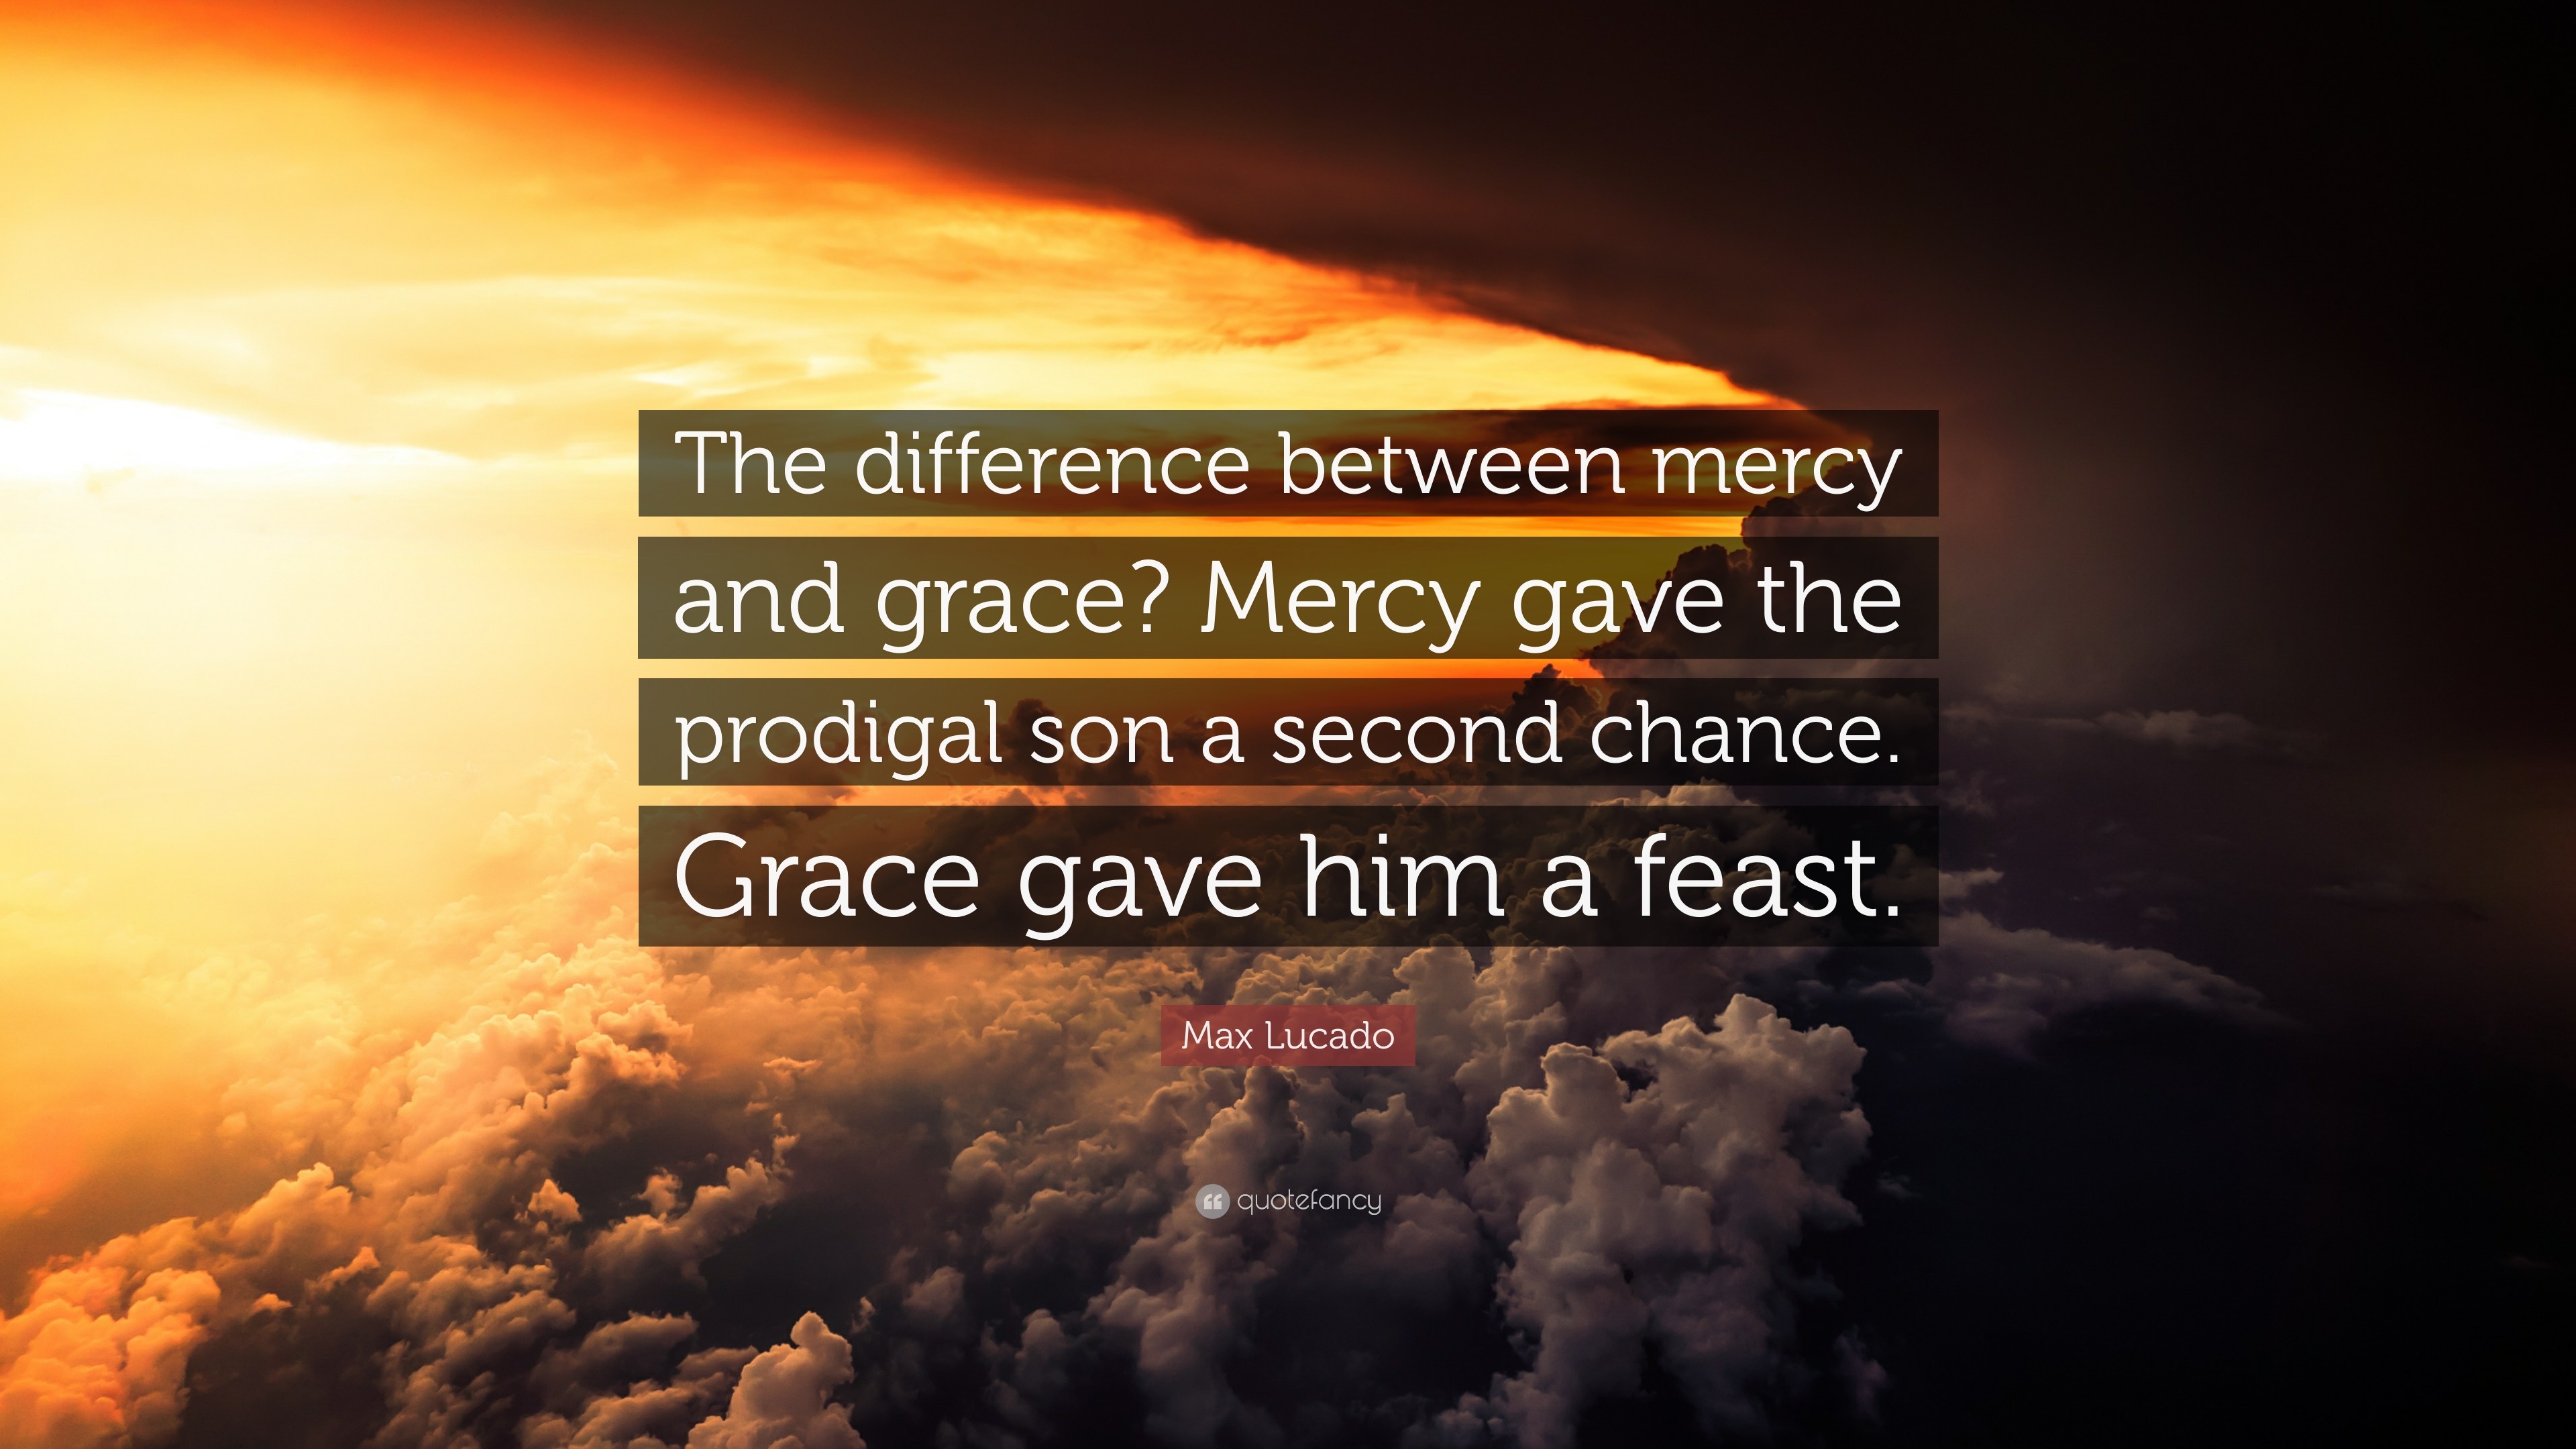 1727089 Max Lucado Quote The Difference Between Mercy And Grace Mercy Gave 